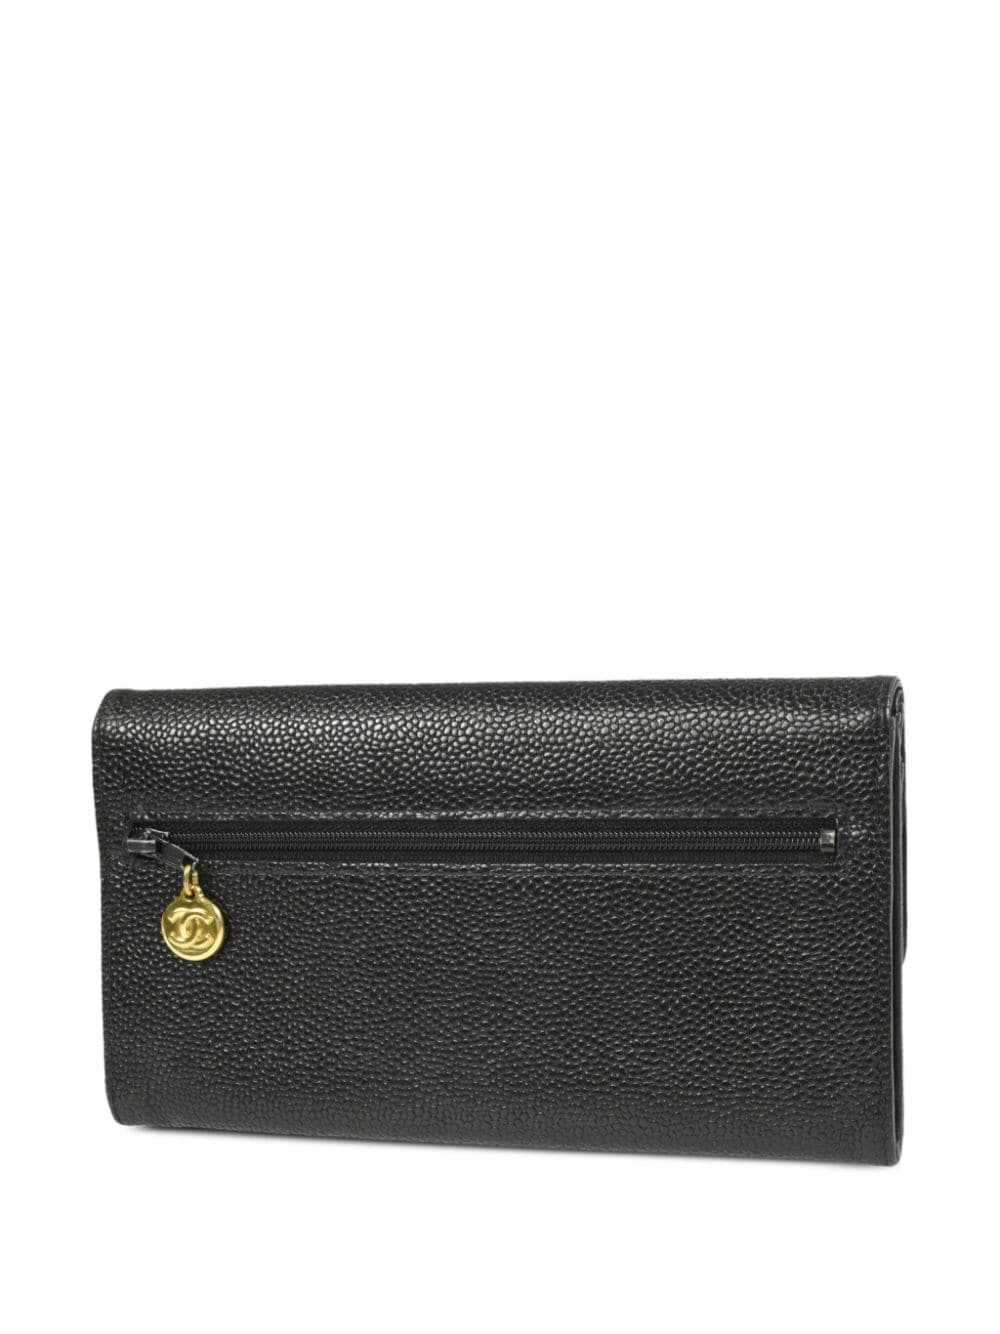 CHANEL Pre-Owned 1998 long flap wallet - Black - image 2